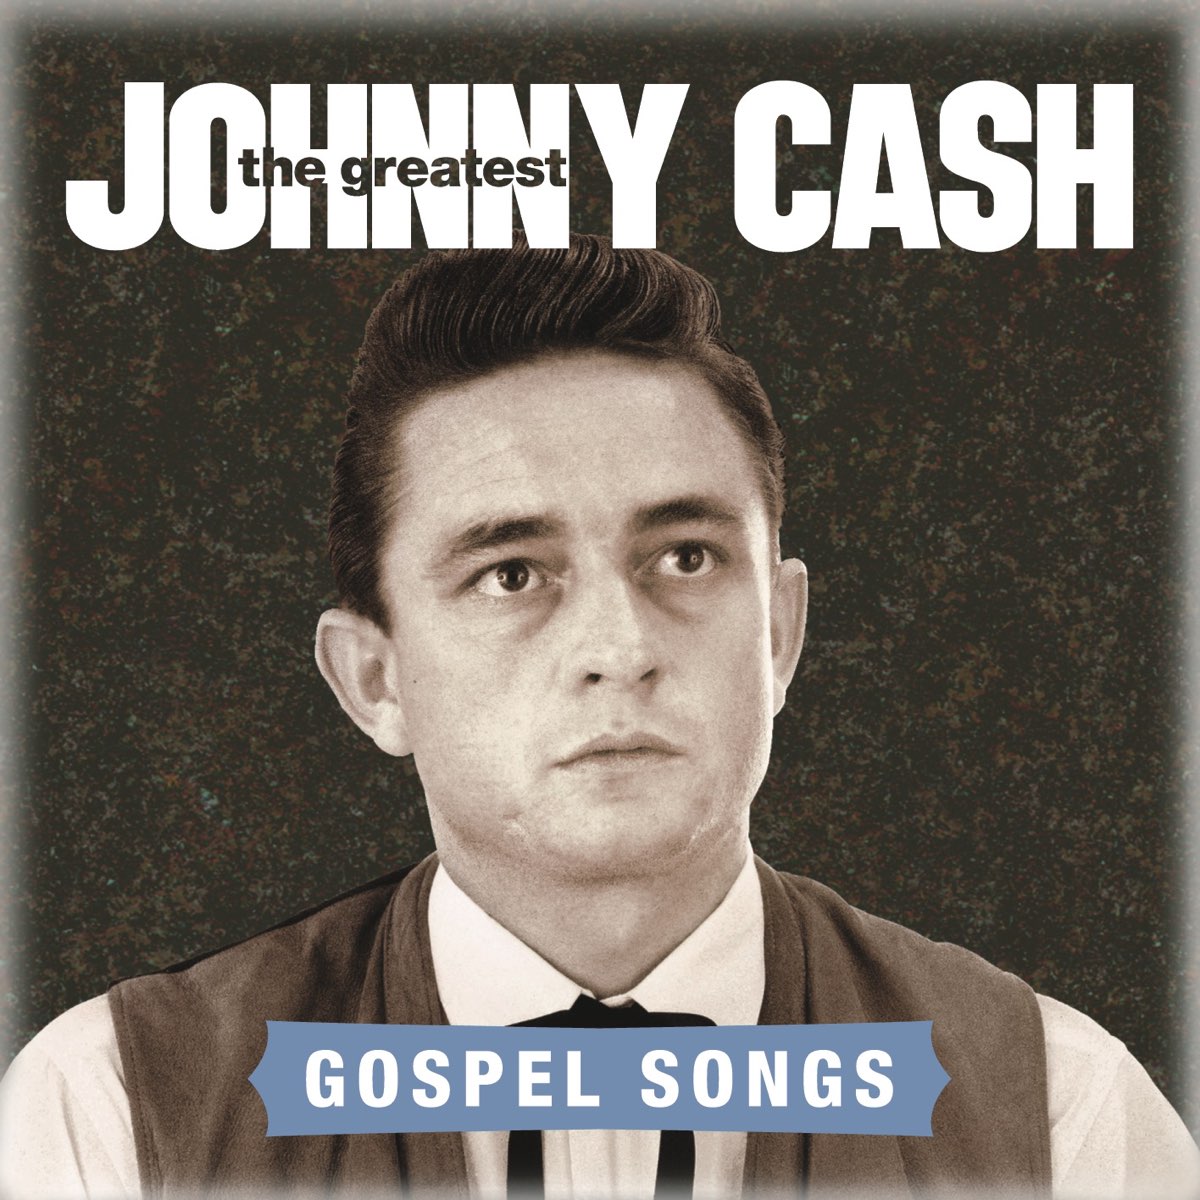 Johnny Cash Now, there was a Song!.